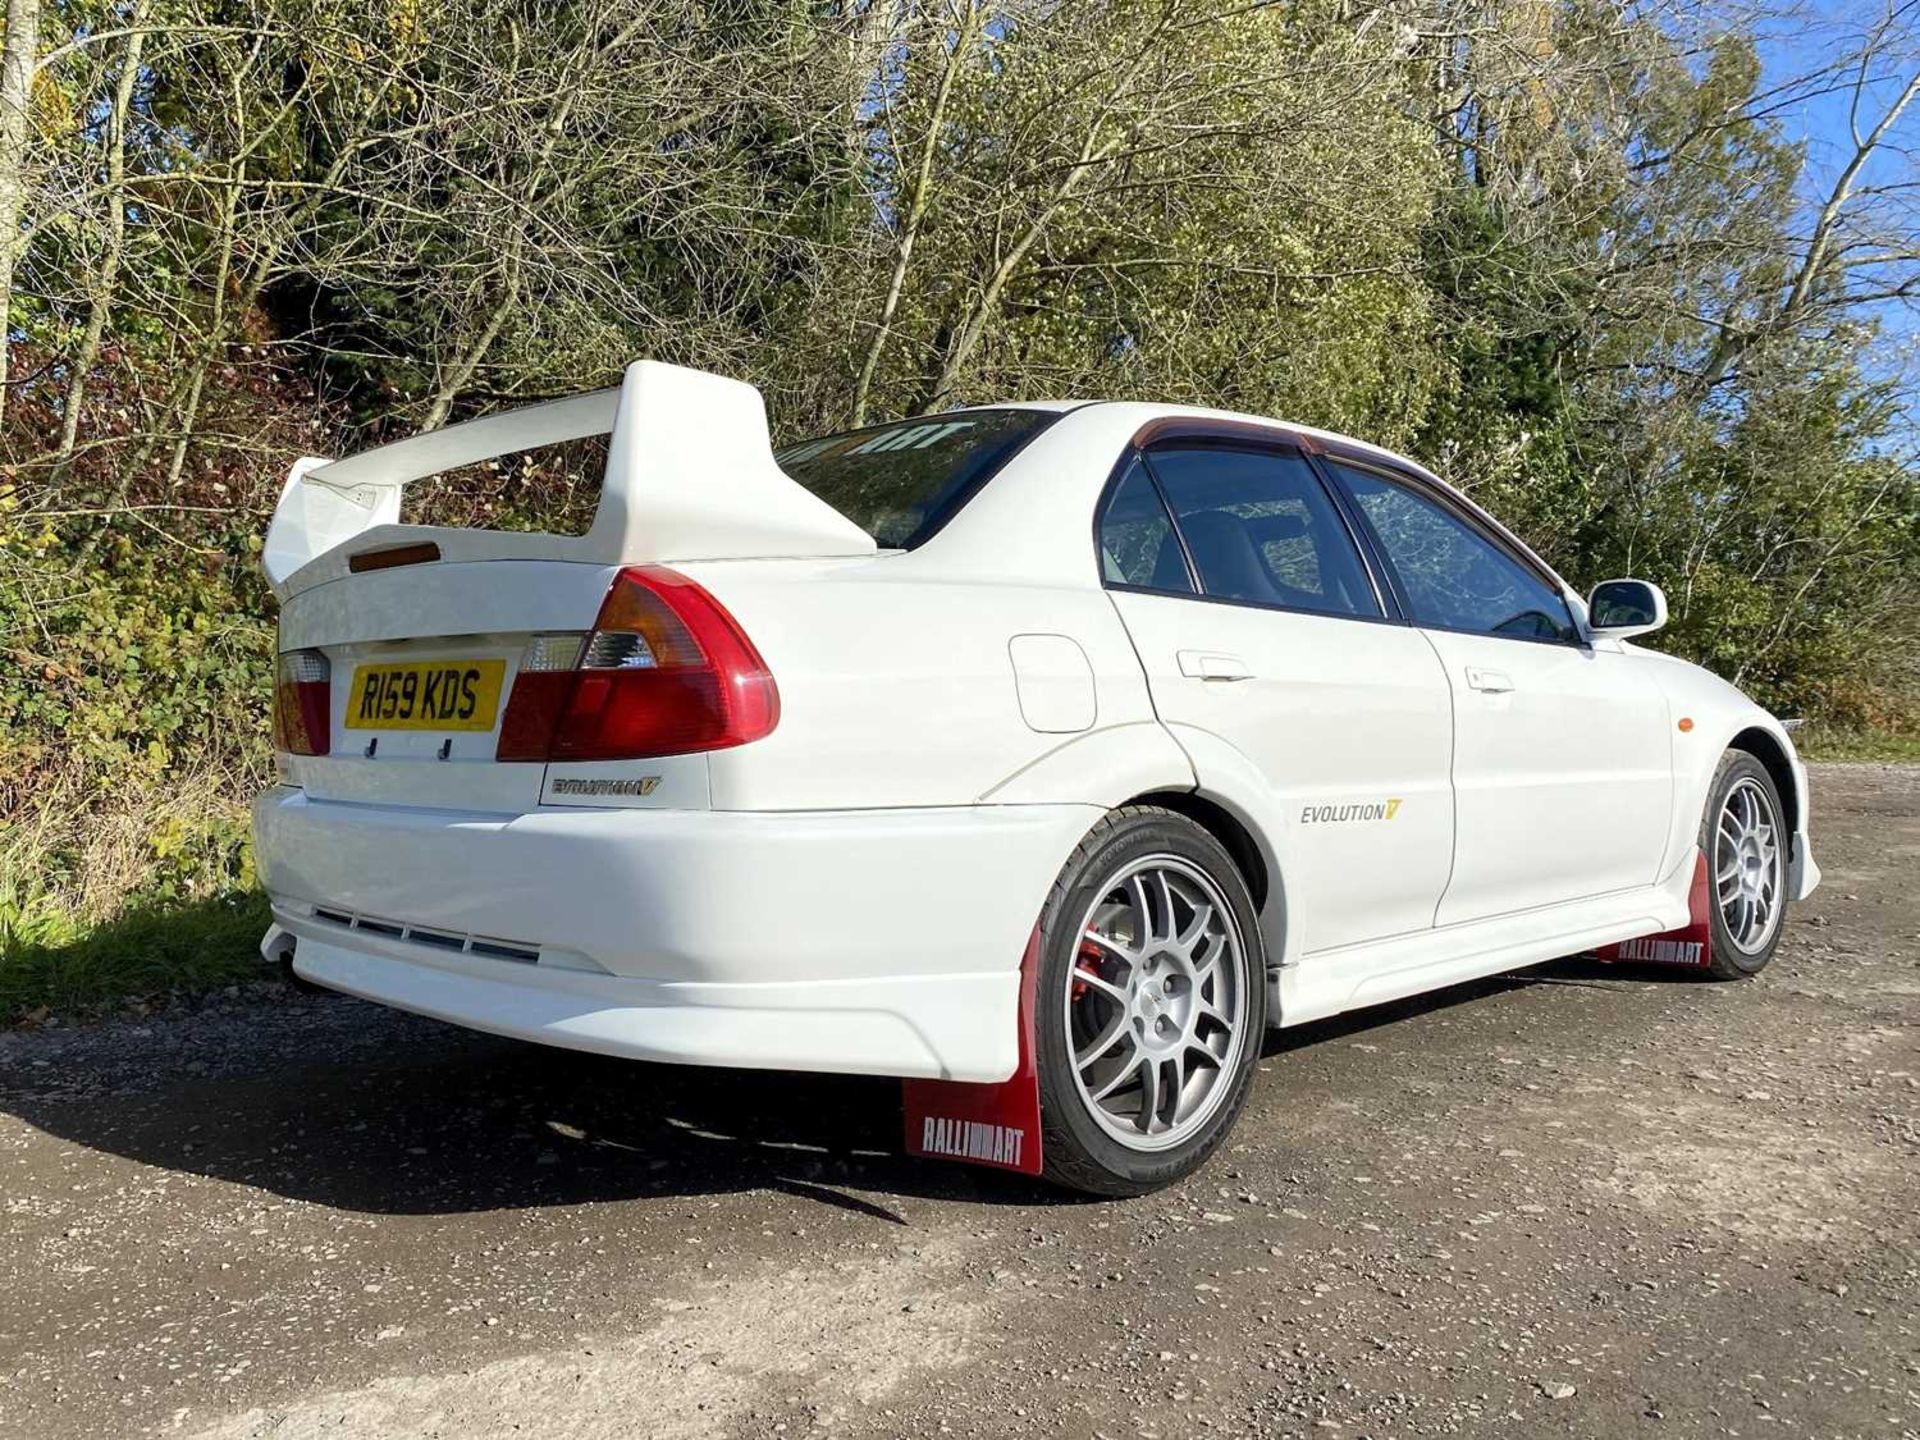 1998 Mitsubishi Lancer Evolution V GSR One UK keeper since being imported two years ago - Image 21 of 100